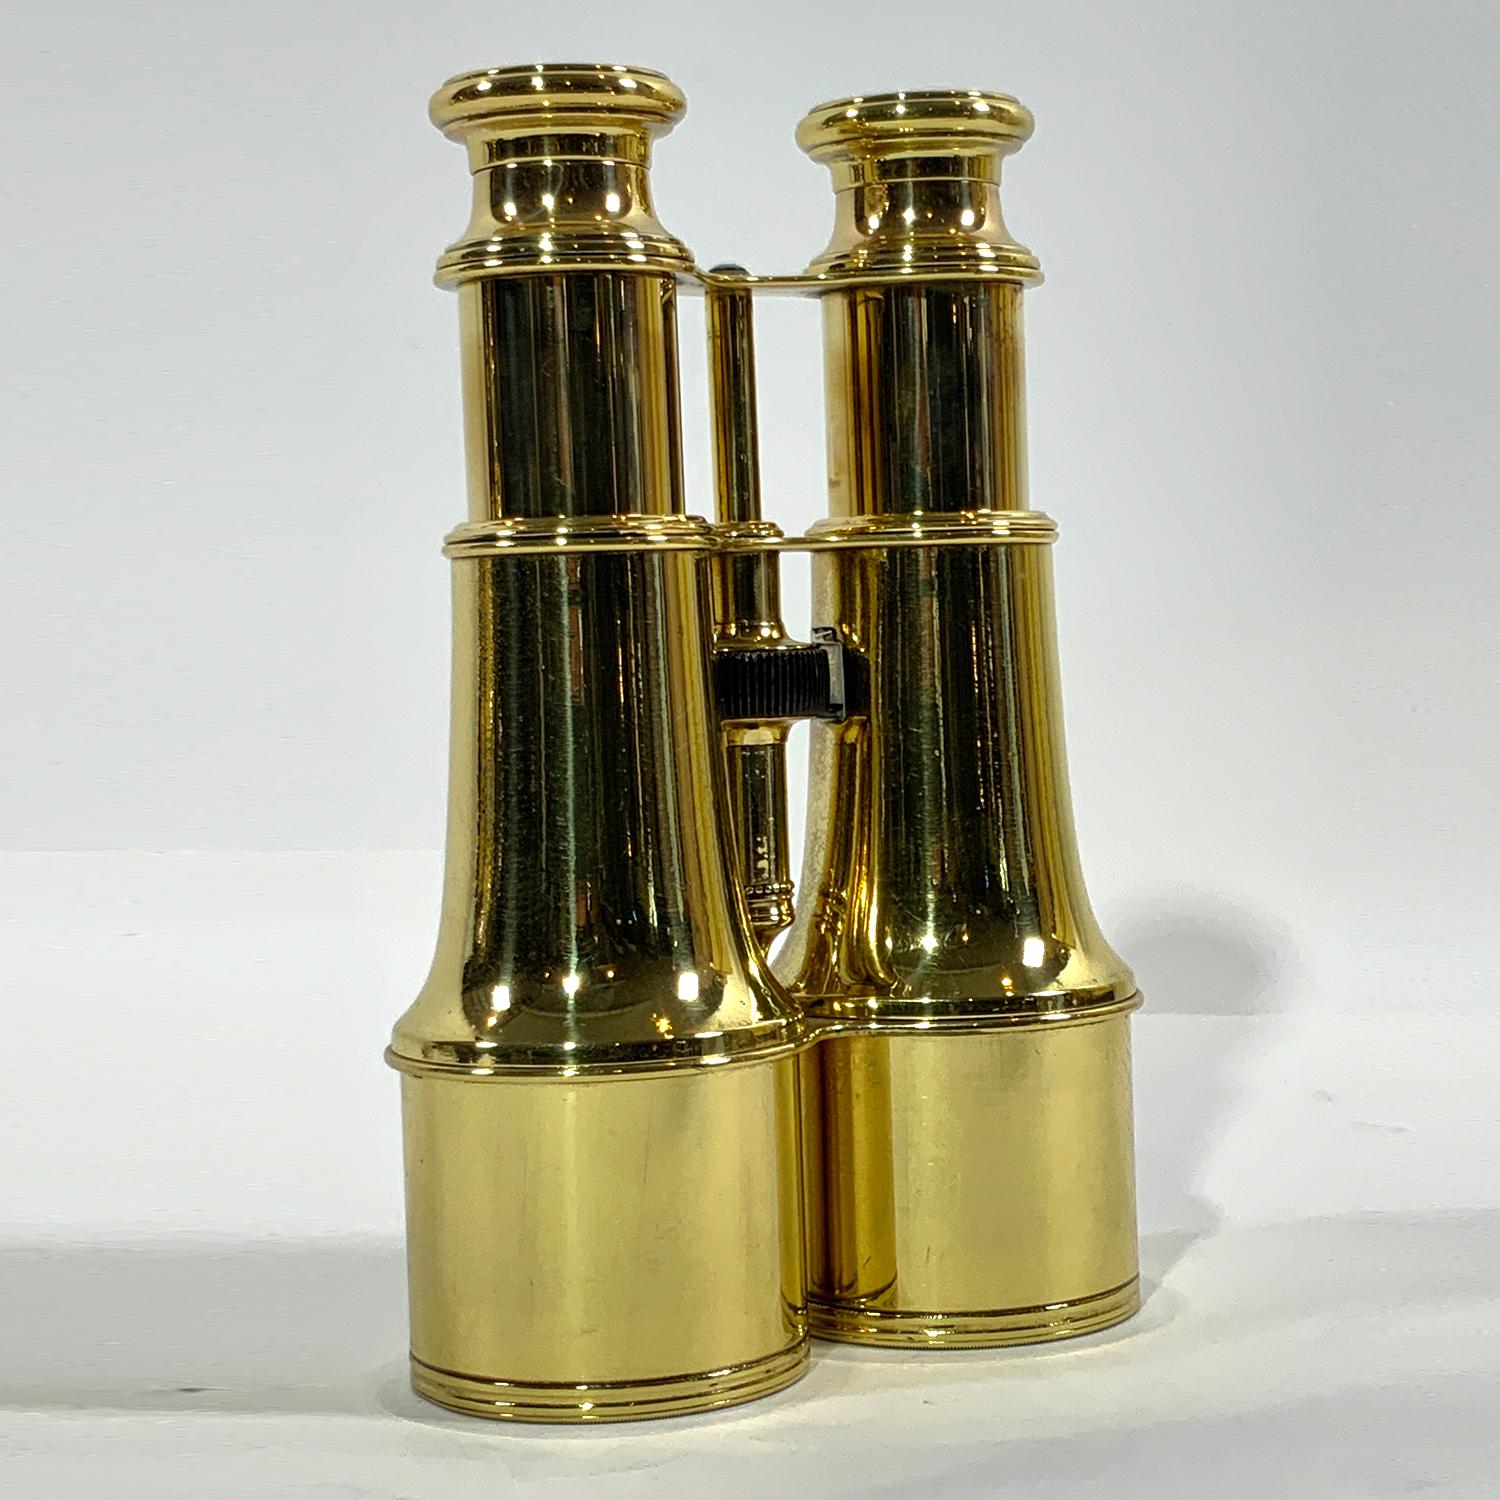 Pair of highly polished and lacquered French made yachting binoculars with engraved eyepieces 